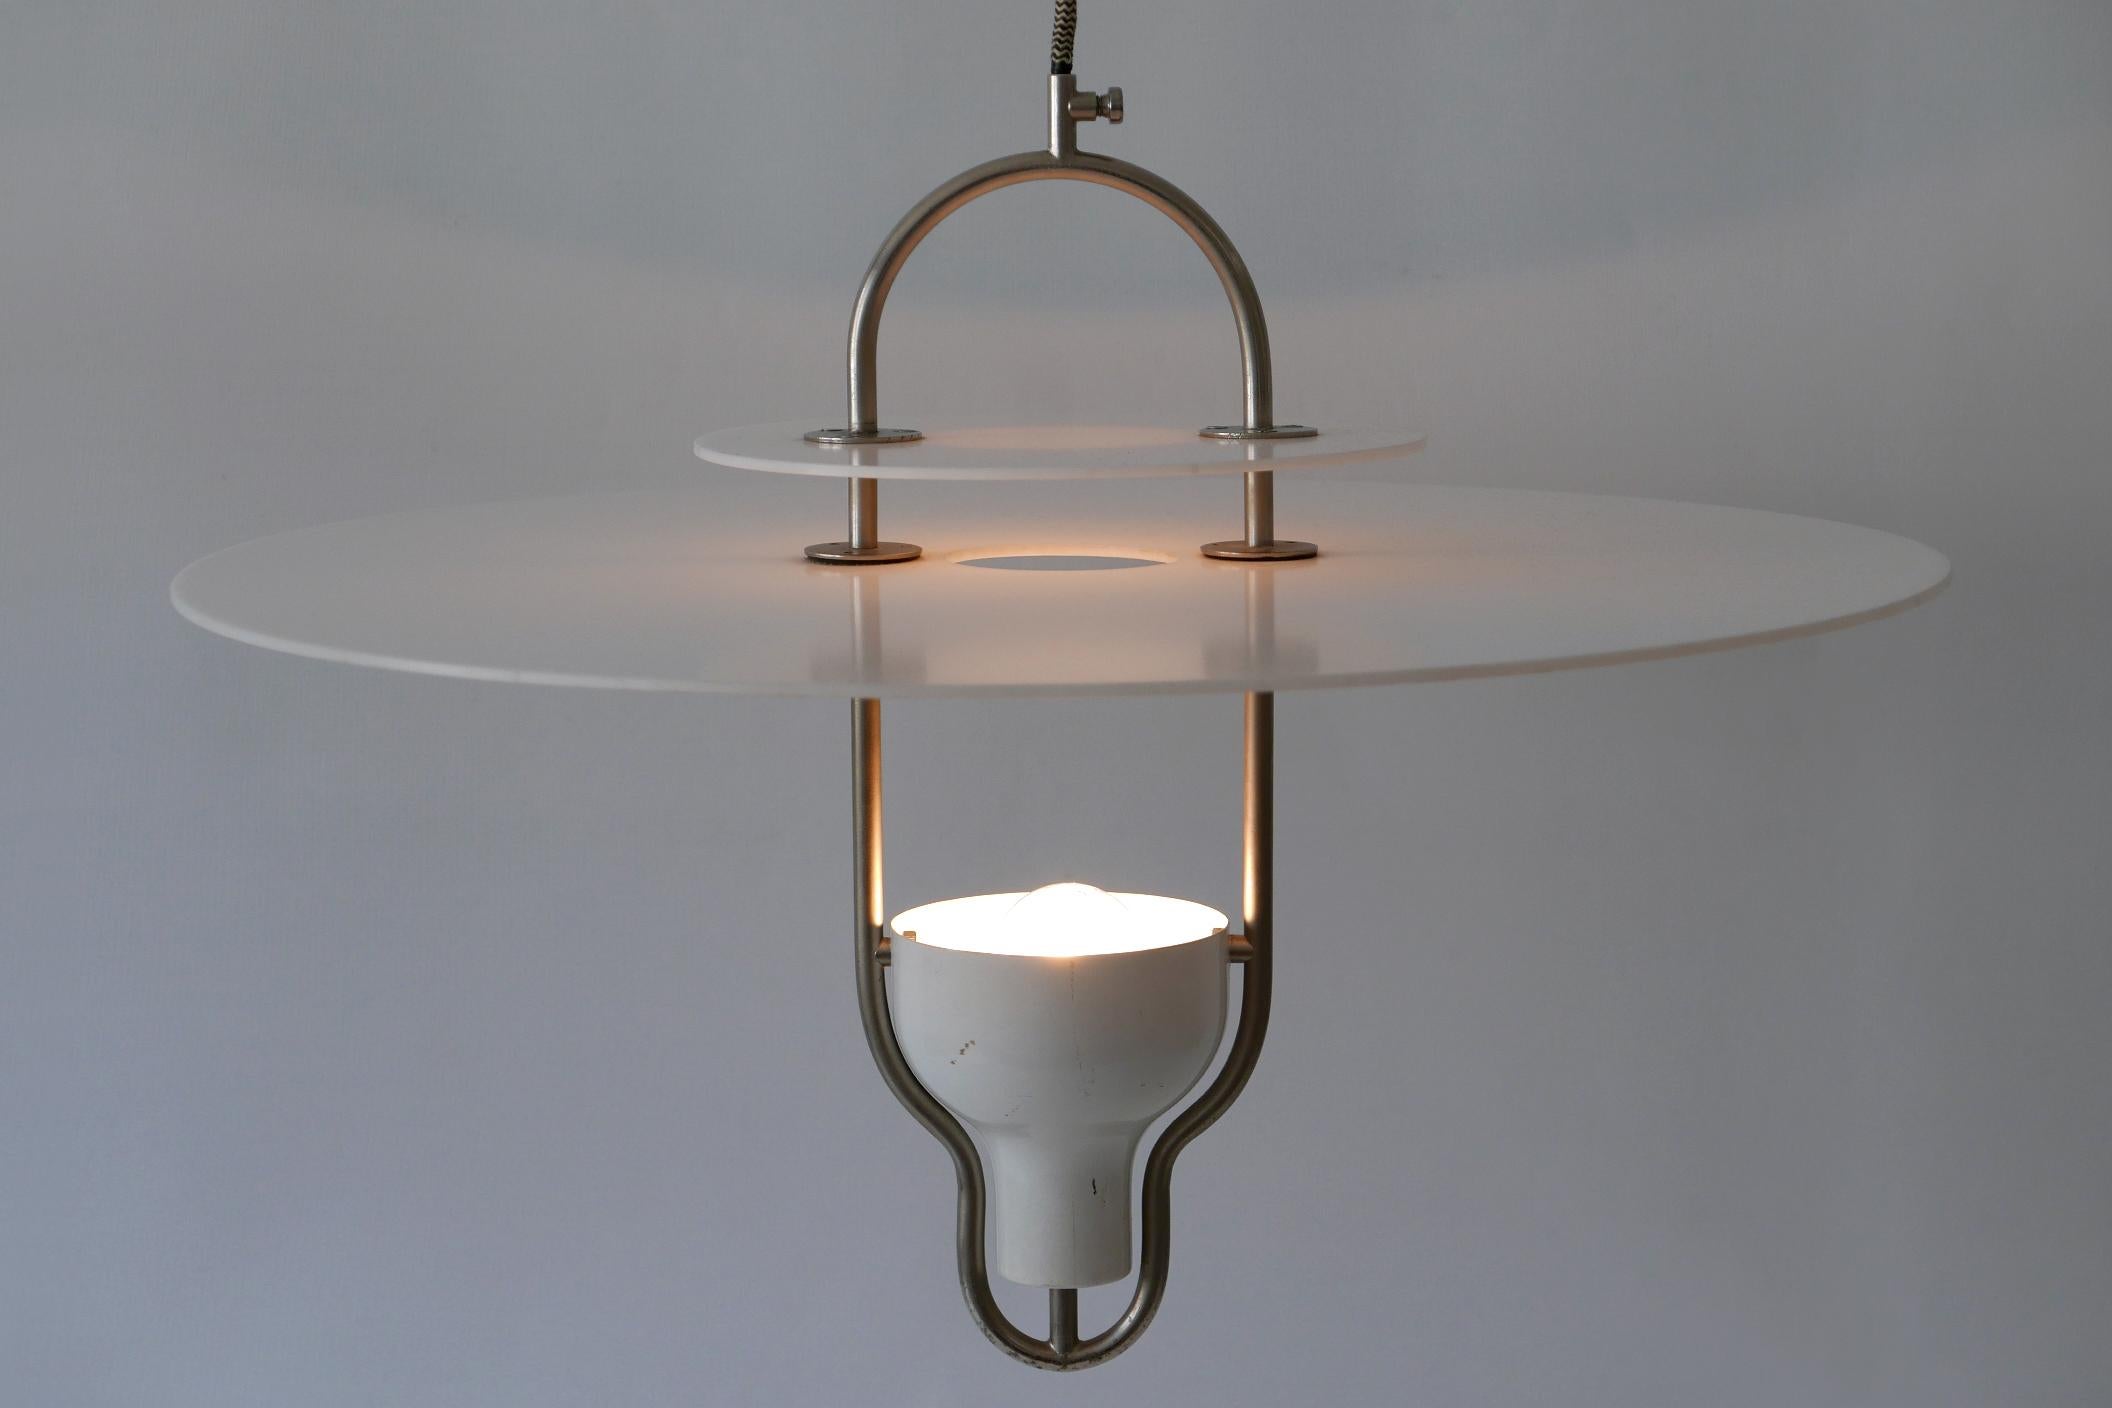 Extremely rare and elegant Mid-Century Modern pendant lamp. Manufactured probably in Italy, 1960s.

Executed in two white plexiglass discs and nickel-plated steel, the pendant lamp needs 1 x E27 / E26 screw fit bulb. It works both with 110 / 230